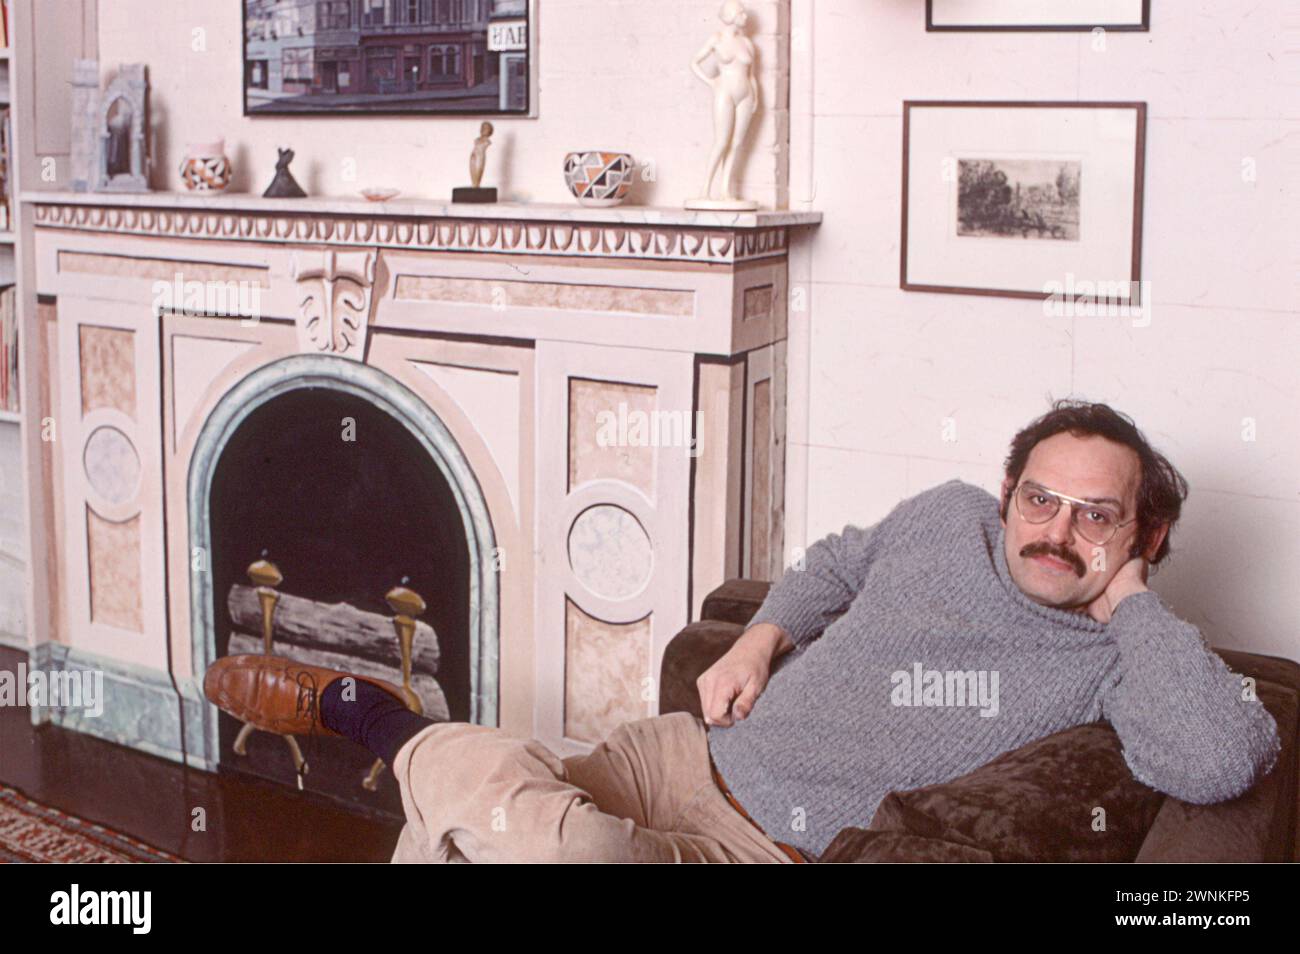 Trompe L'Oiel artist Richard Haas in his loft in Soho, New York City in 1977. The fireplace was one of his paintings. Stock Photo